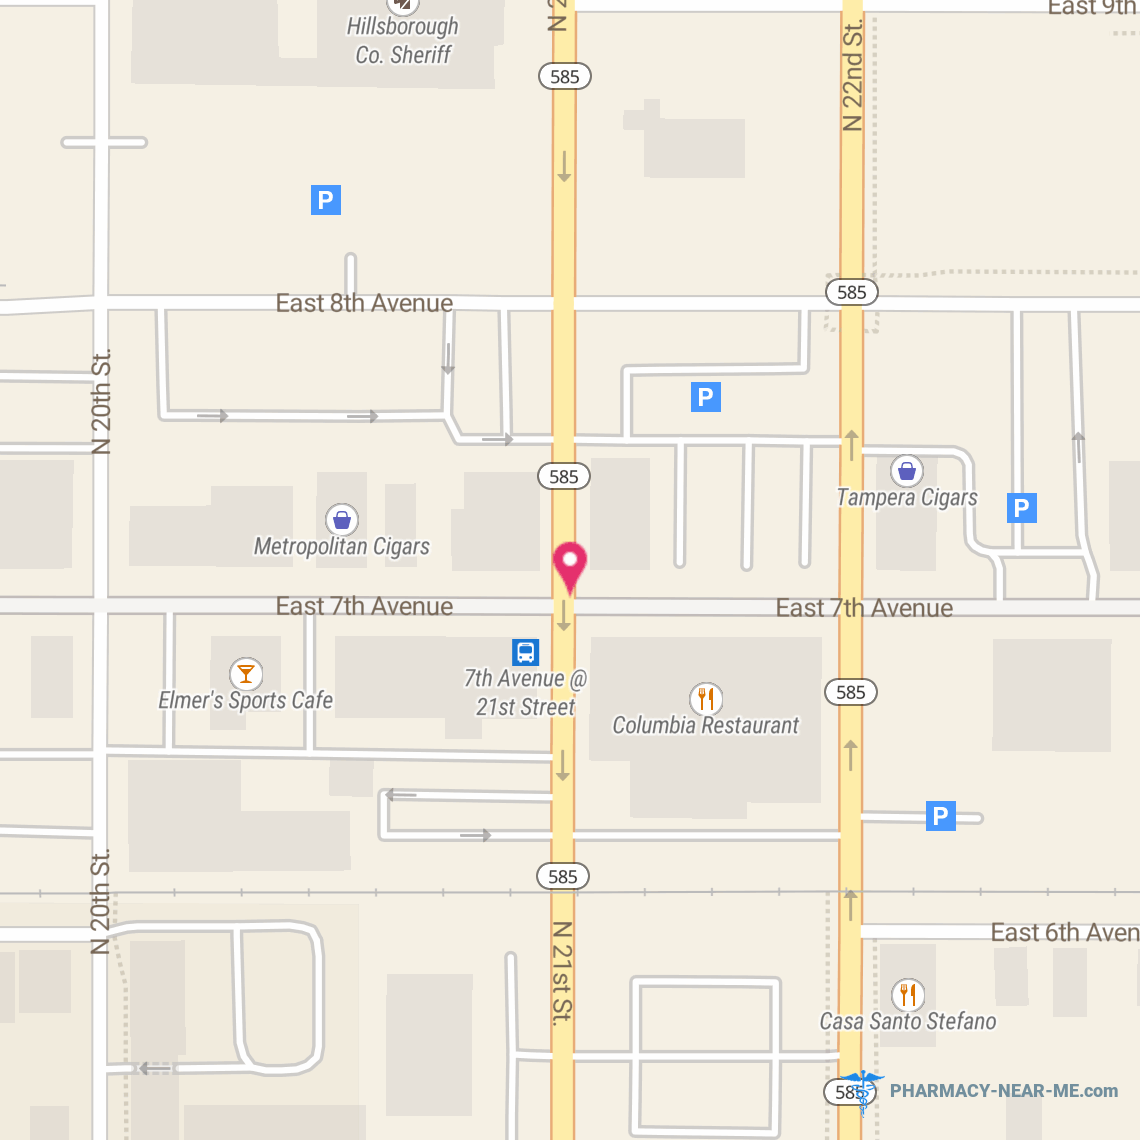 FLORIDA DRUG STORE - Pharmacy Hours, Phone, Reviews & Information: 2102 E 7th Ave, Tampa, FL 33605